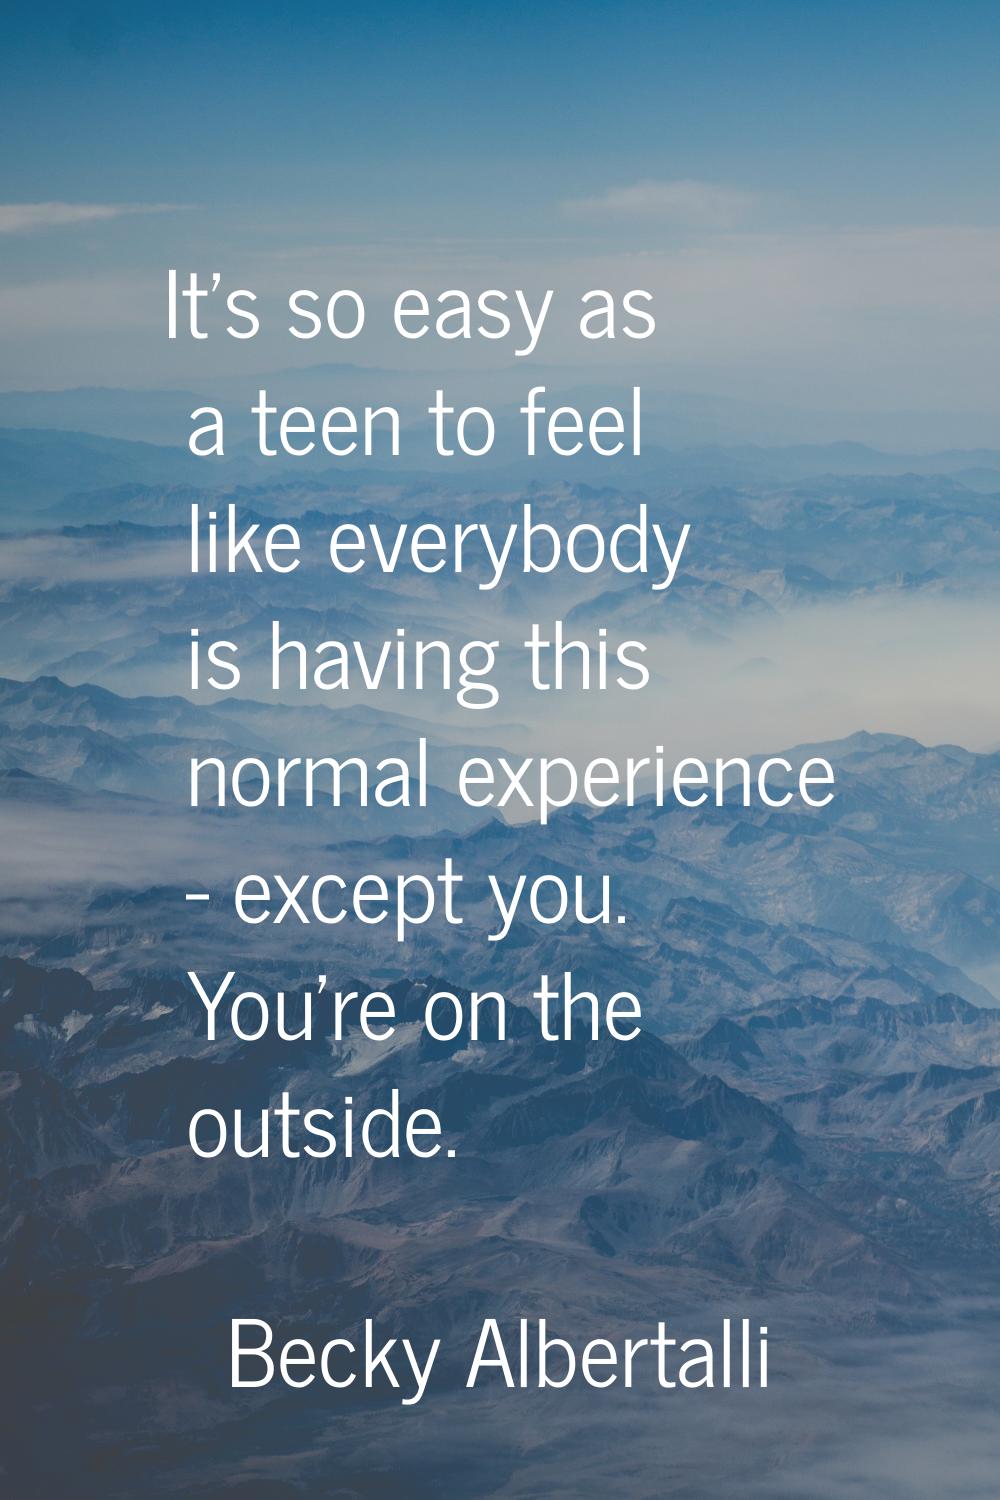 It's so easy as a teen to feel like everybody is having this normal experience - except you. You're